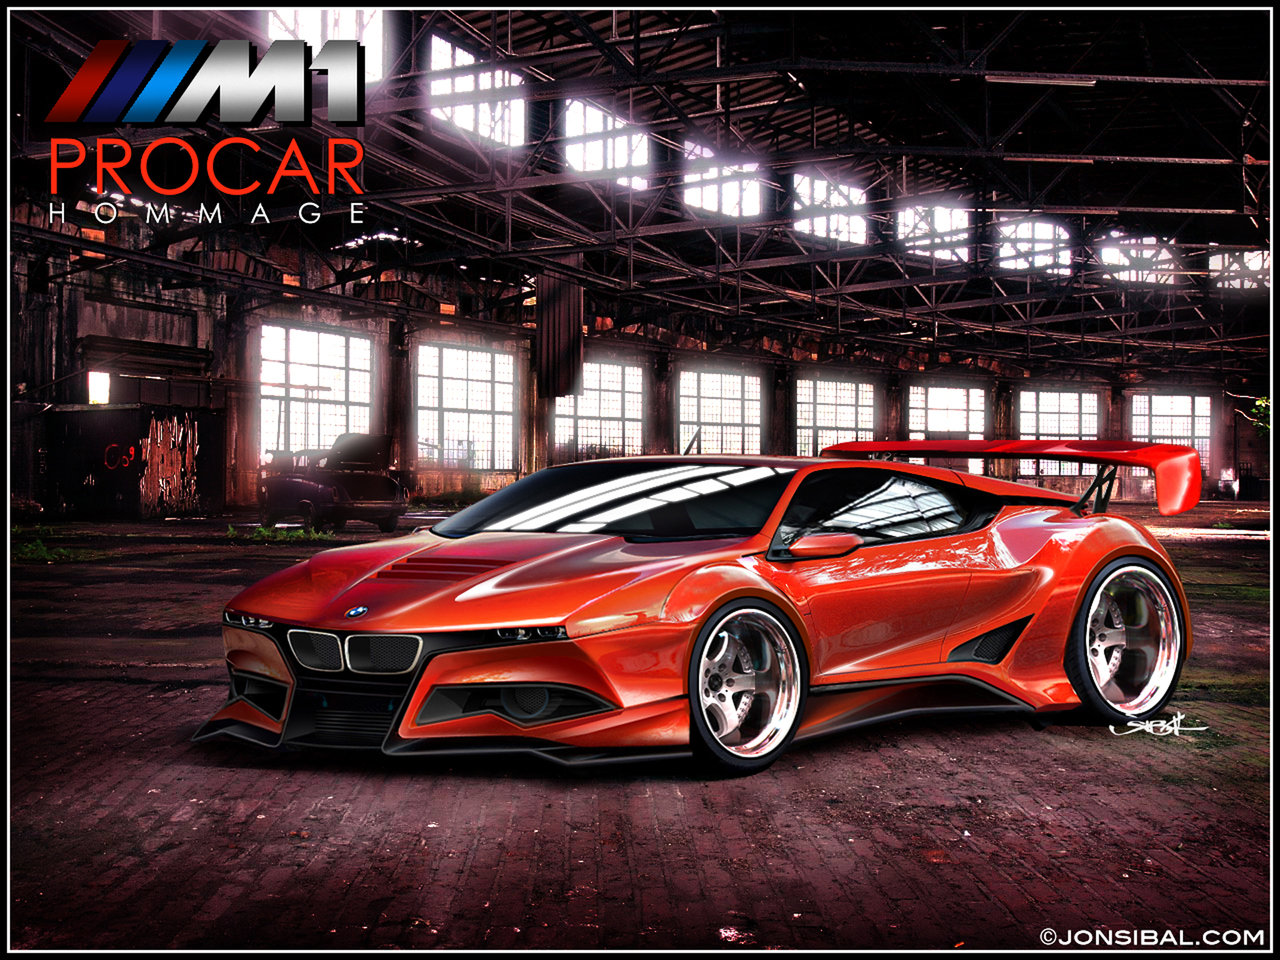 BMW M1 Procar Hommage. And here is the M1 Hommage. Full gallery here